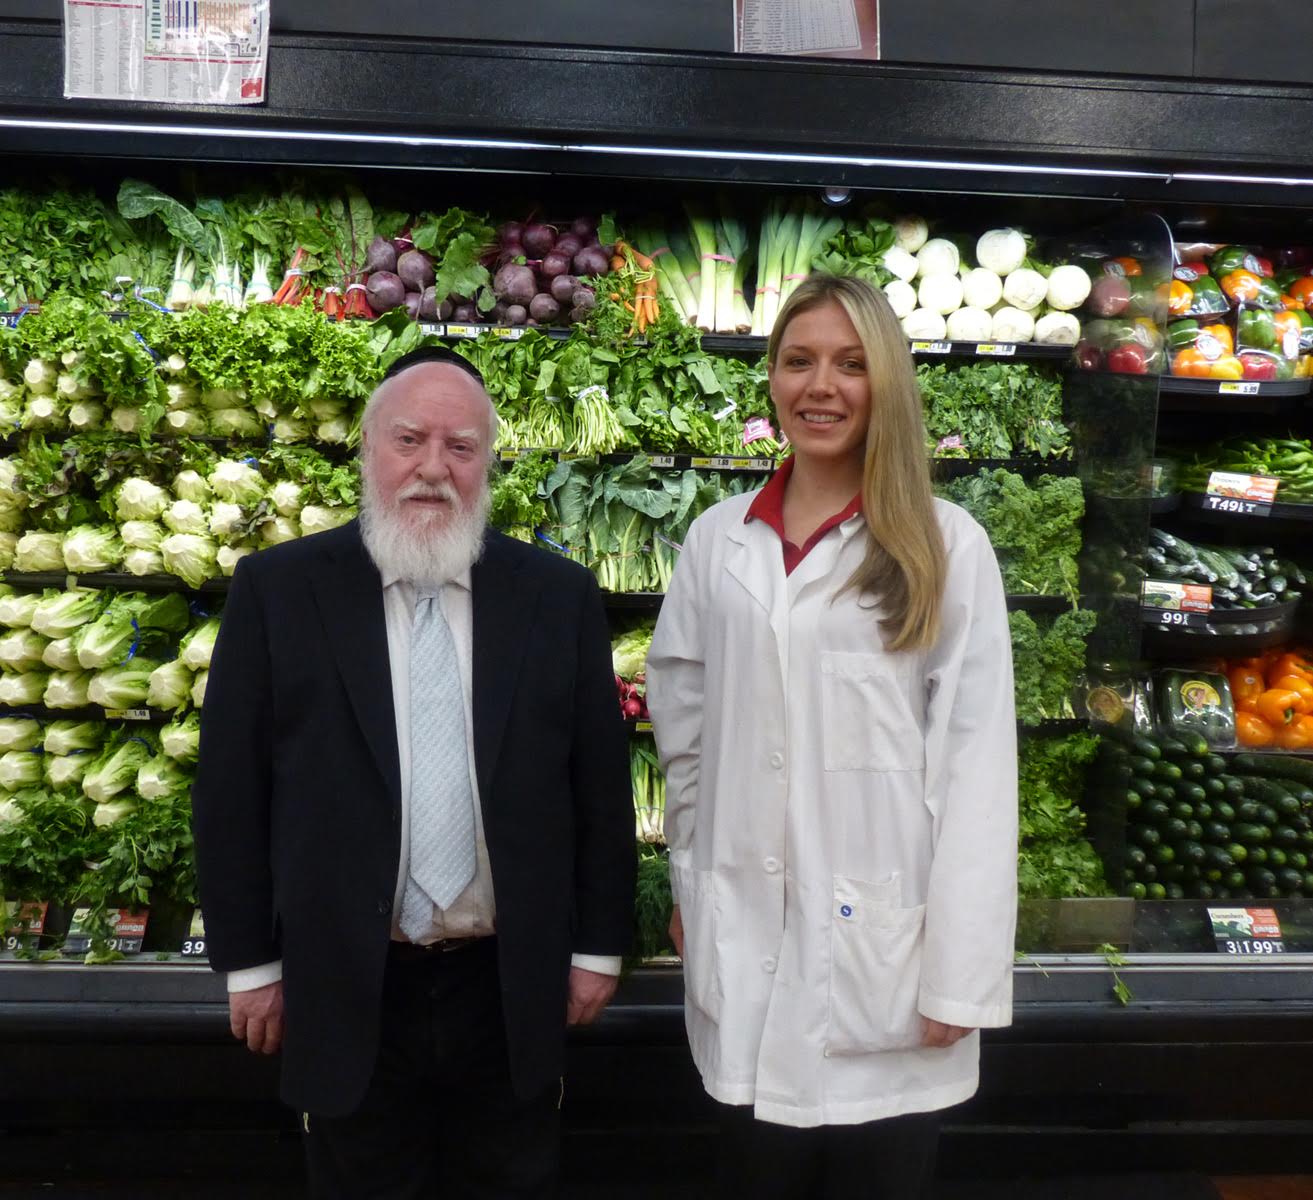 MONSEY MAN CREDITS TALLMAN DIETITIAN WITH IMPROVED HEALTH